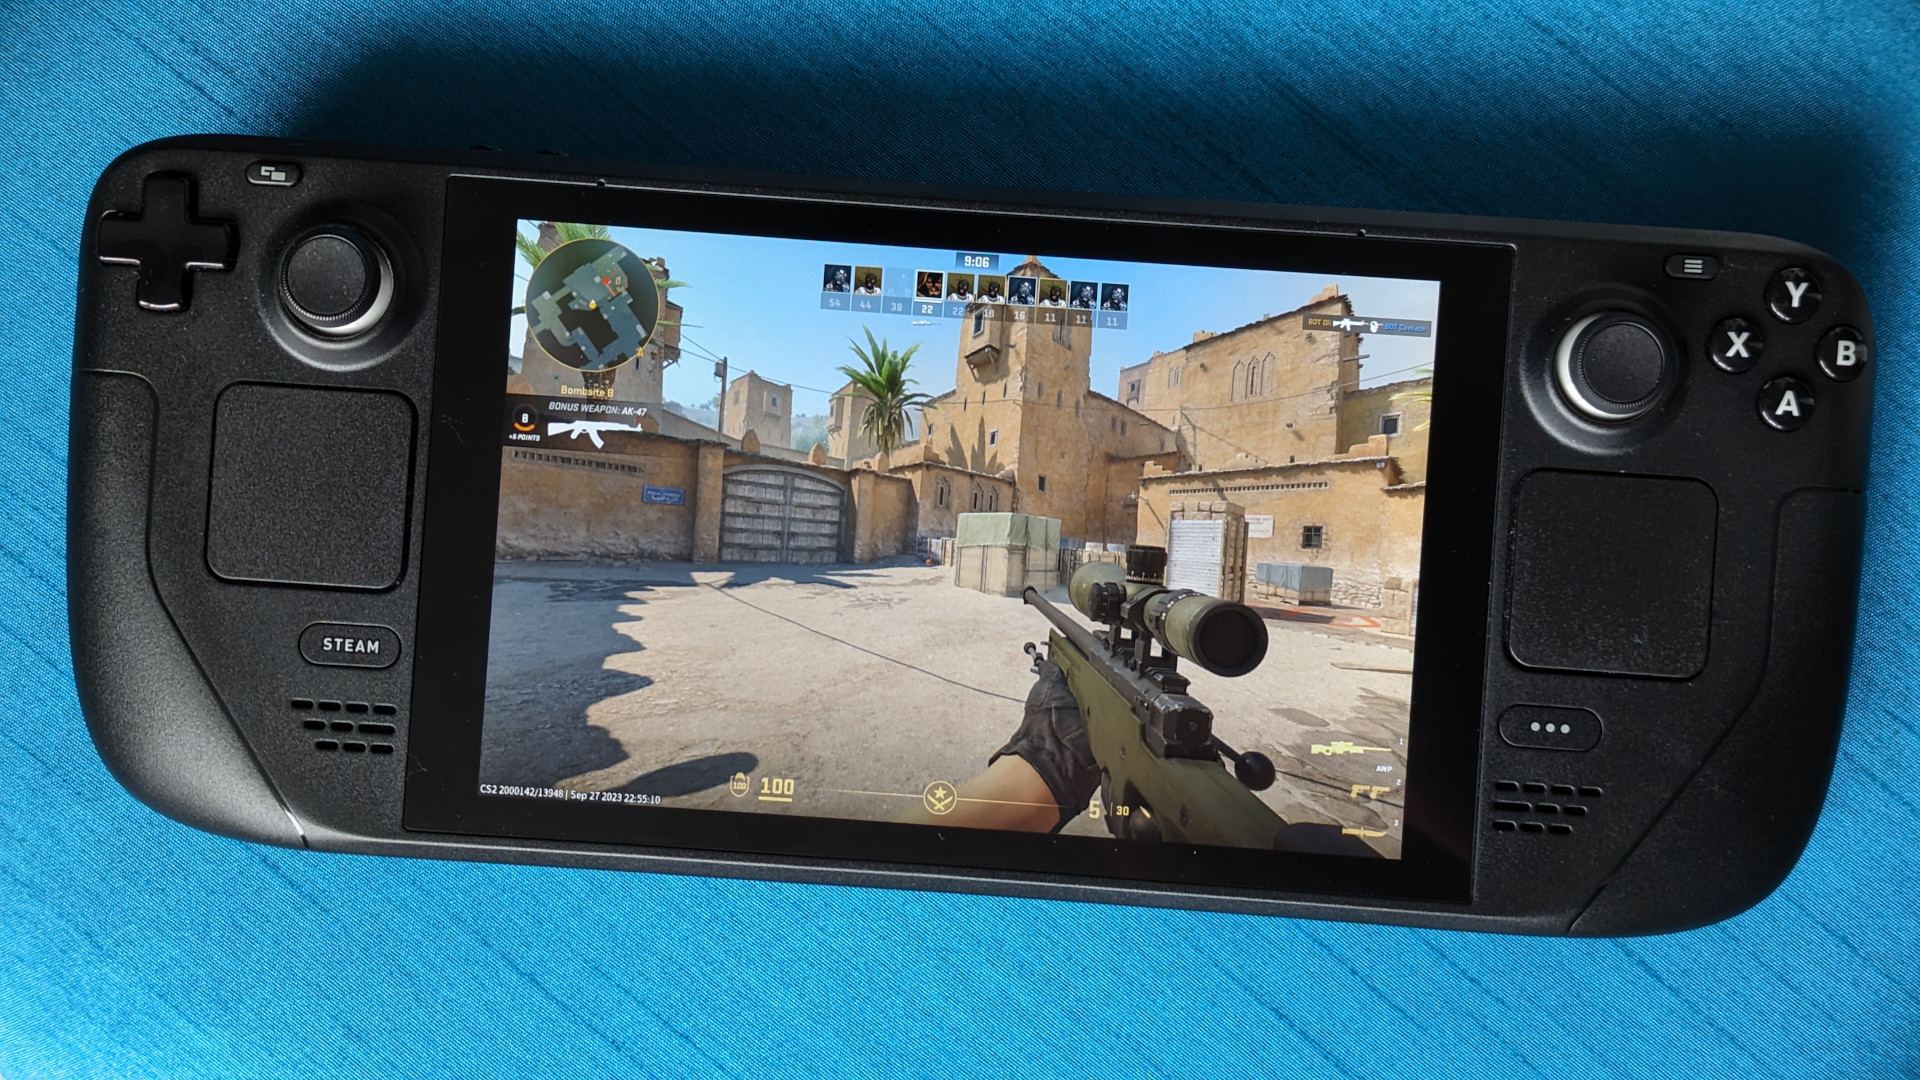 Modern Warfare 2 On The Steam Deck Is Incredible! Hands-On Windows Gameplay  Test 